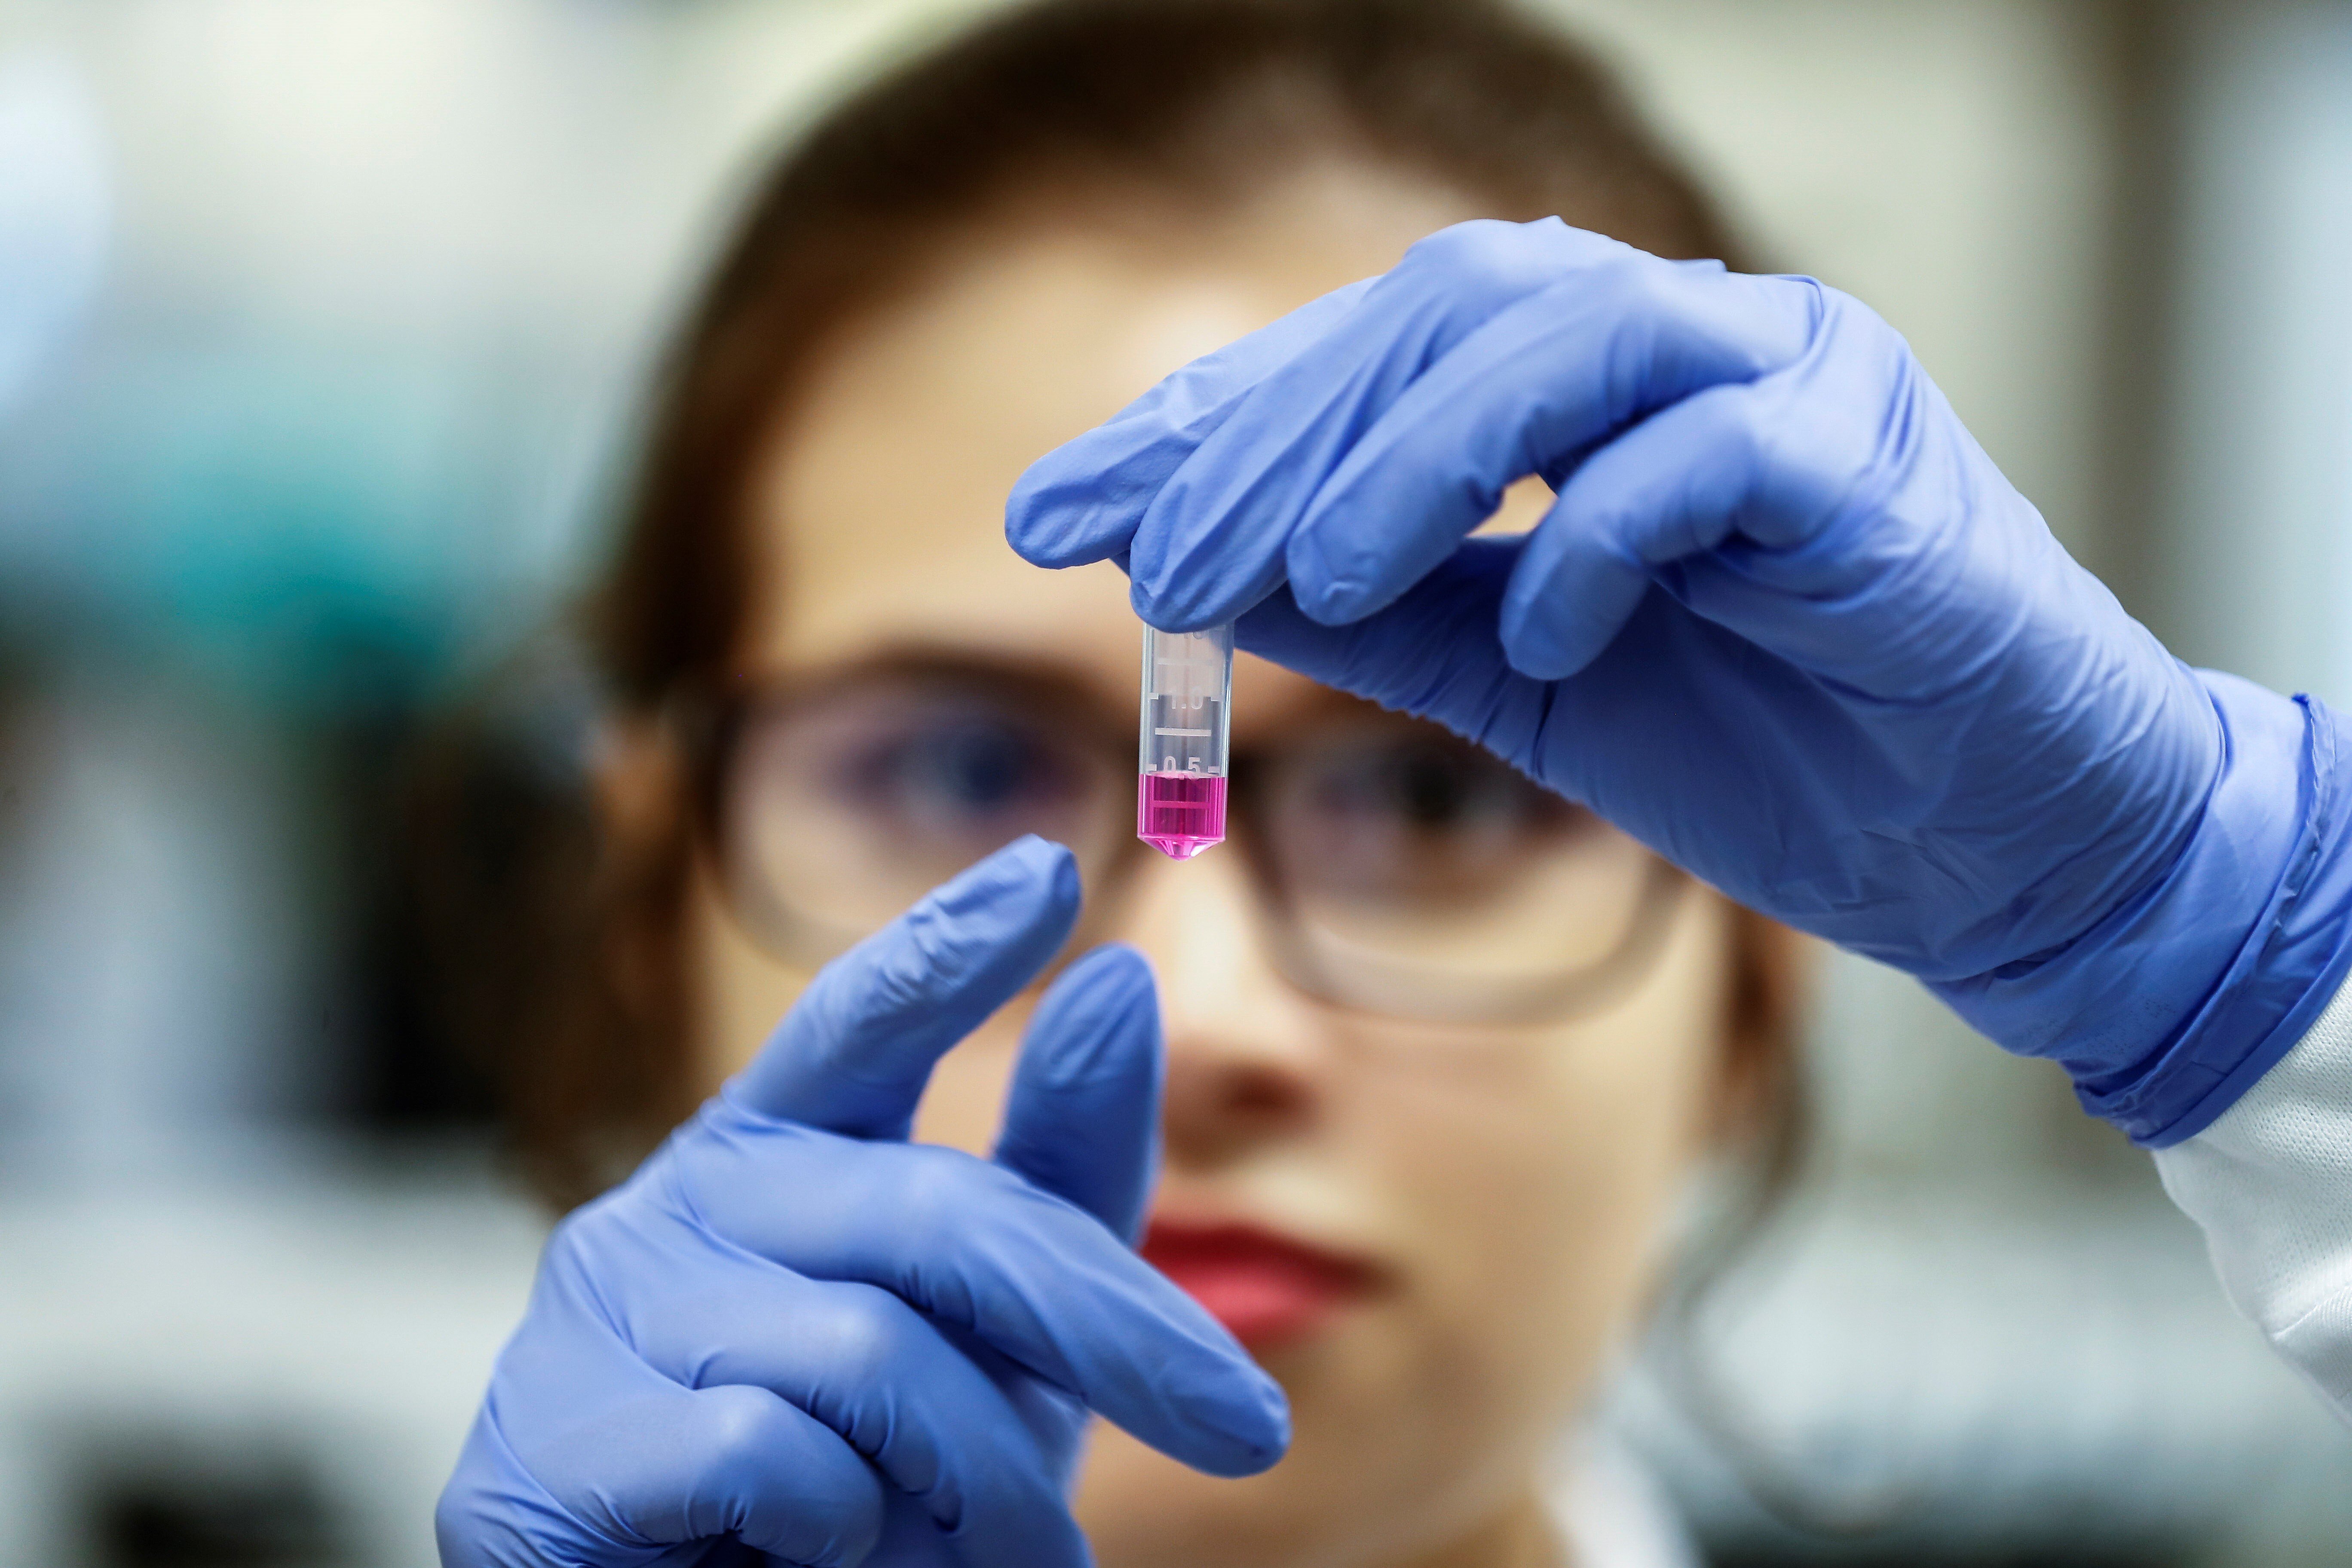 A scientist at a laboratory in Brazil works on a potential coronavirus vaccine, as researchers fast-track numerous possible treatments while the Covid-19 pandemic rapidly spreads. Photo: EPA-EFE